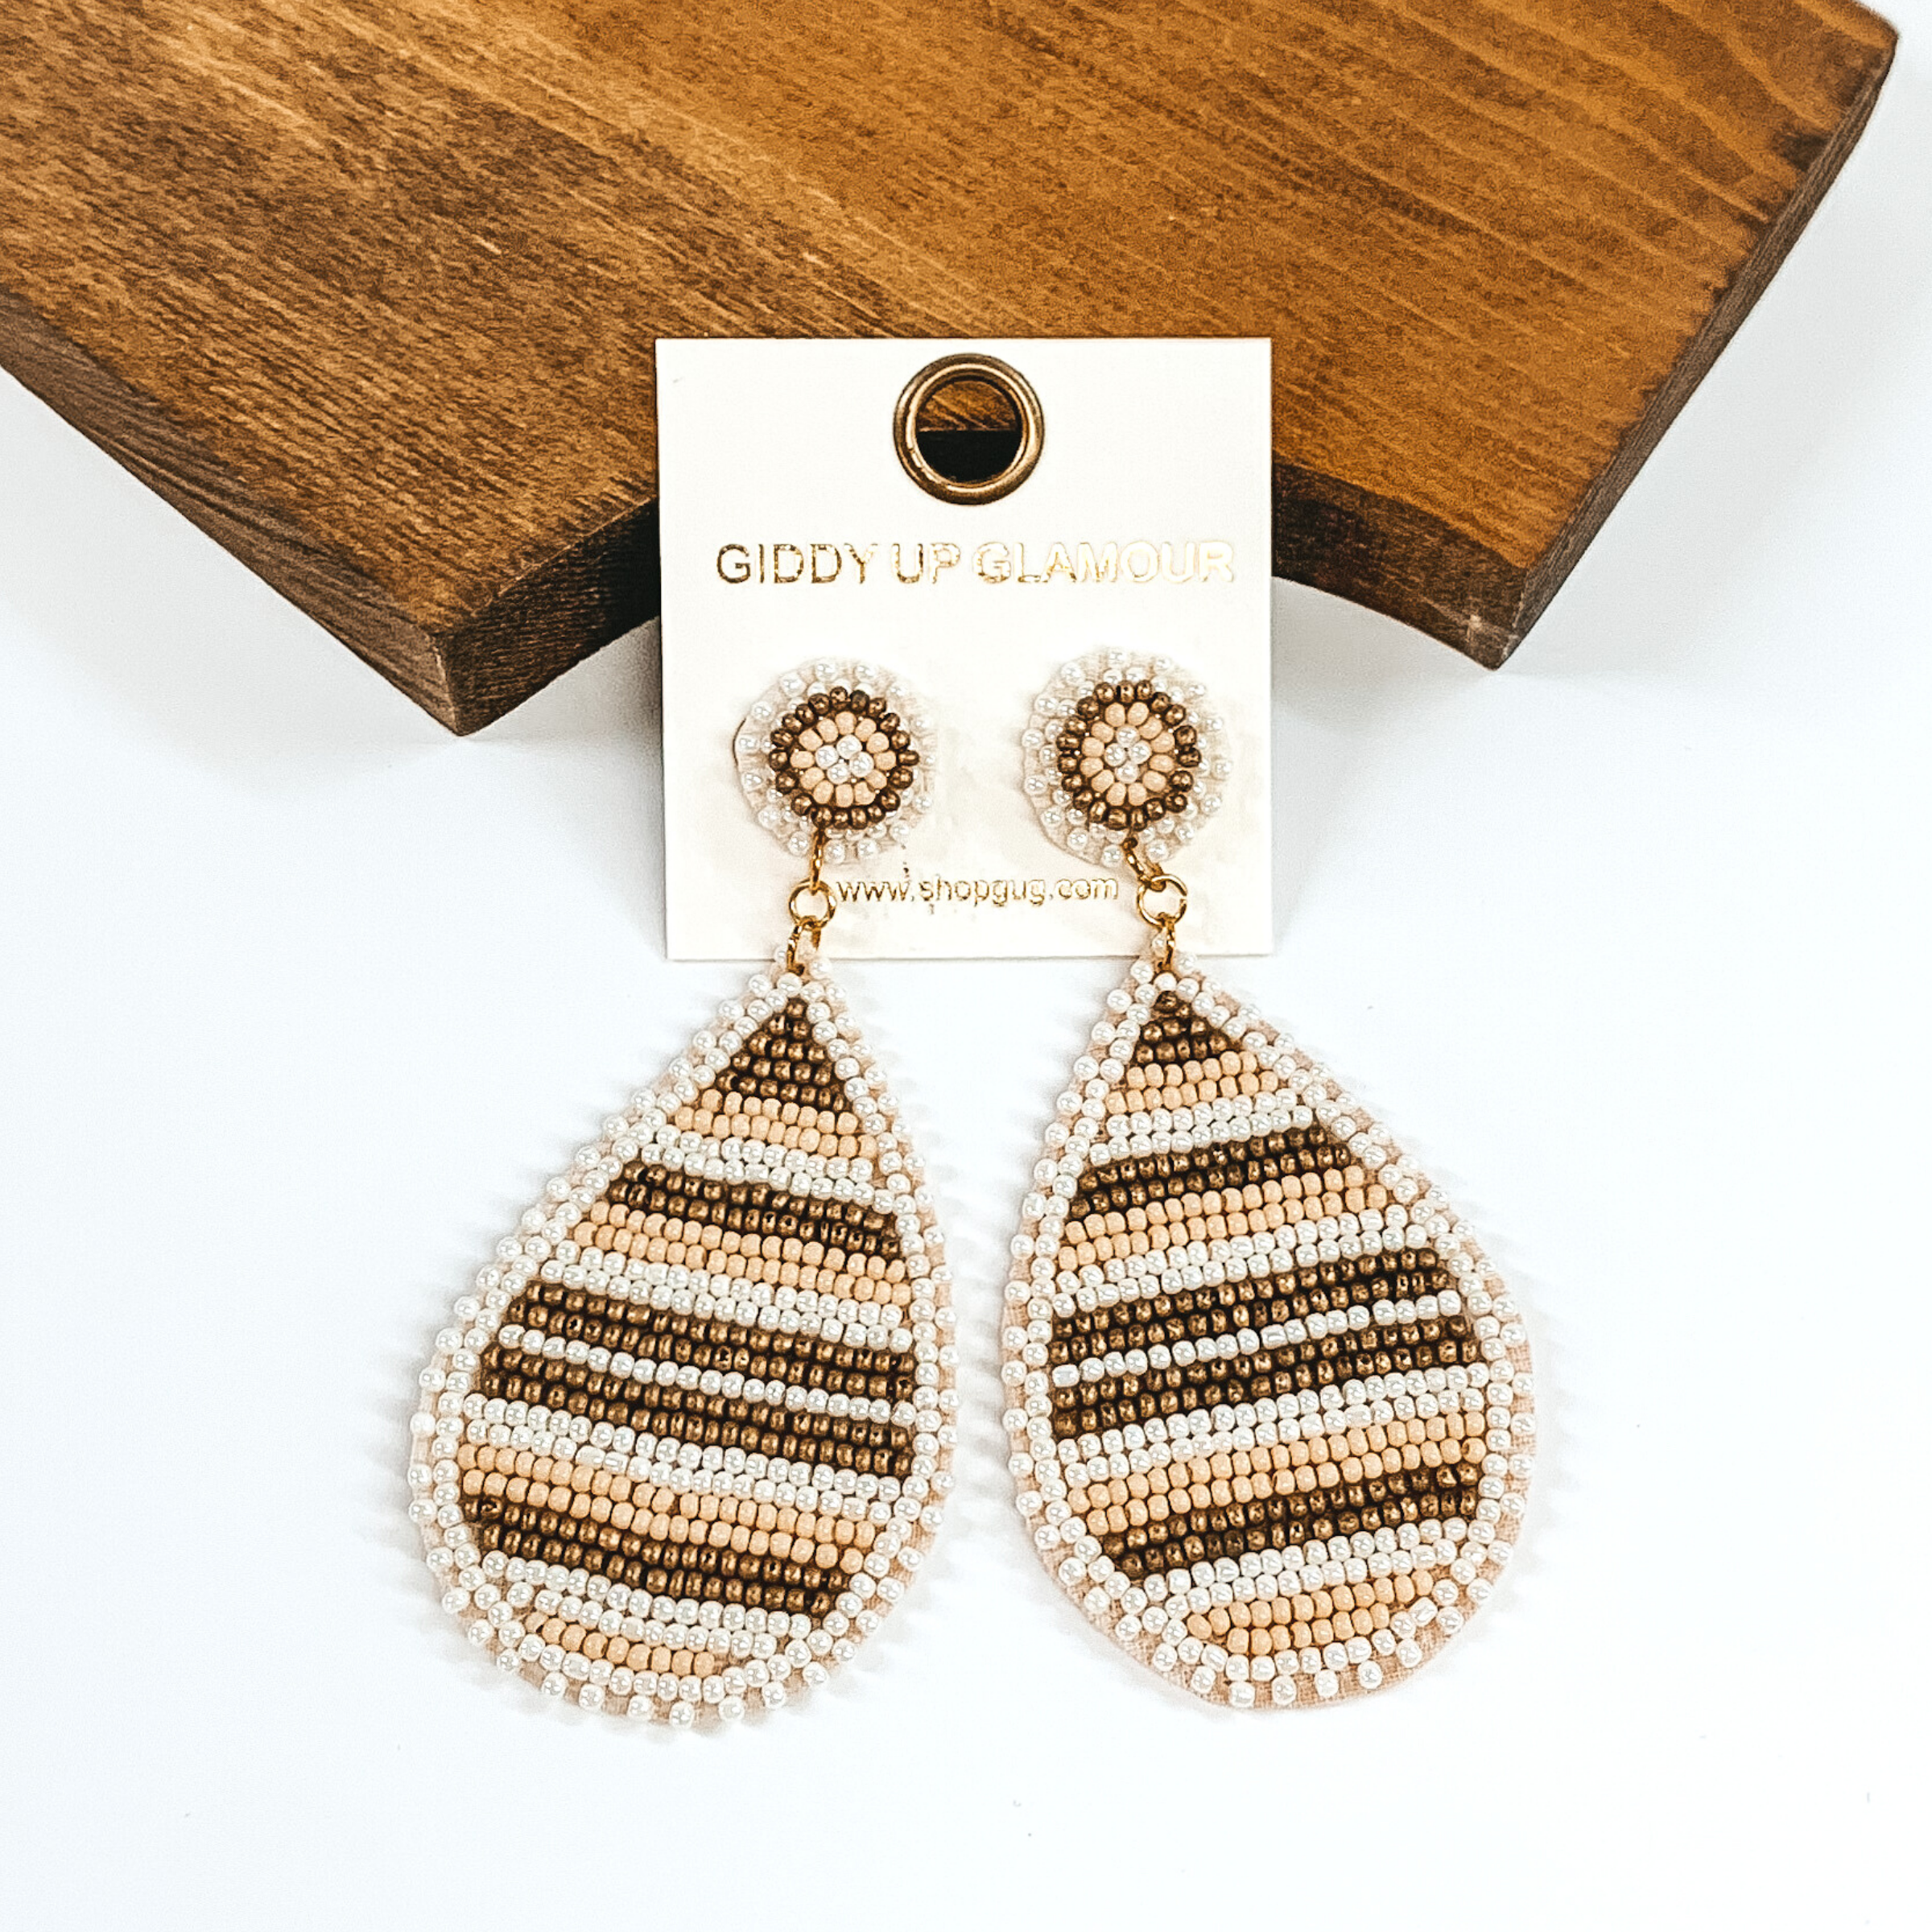 These earrings have a circle beaded stud that has a beaded teardrop hanging part. This pair of earrings is striped and includes white, beige, and gold colors. These earrings are pictured on a white background and laying against a dark piece of wood. 